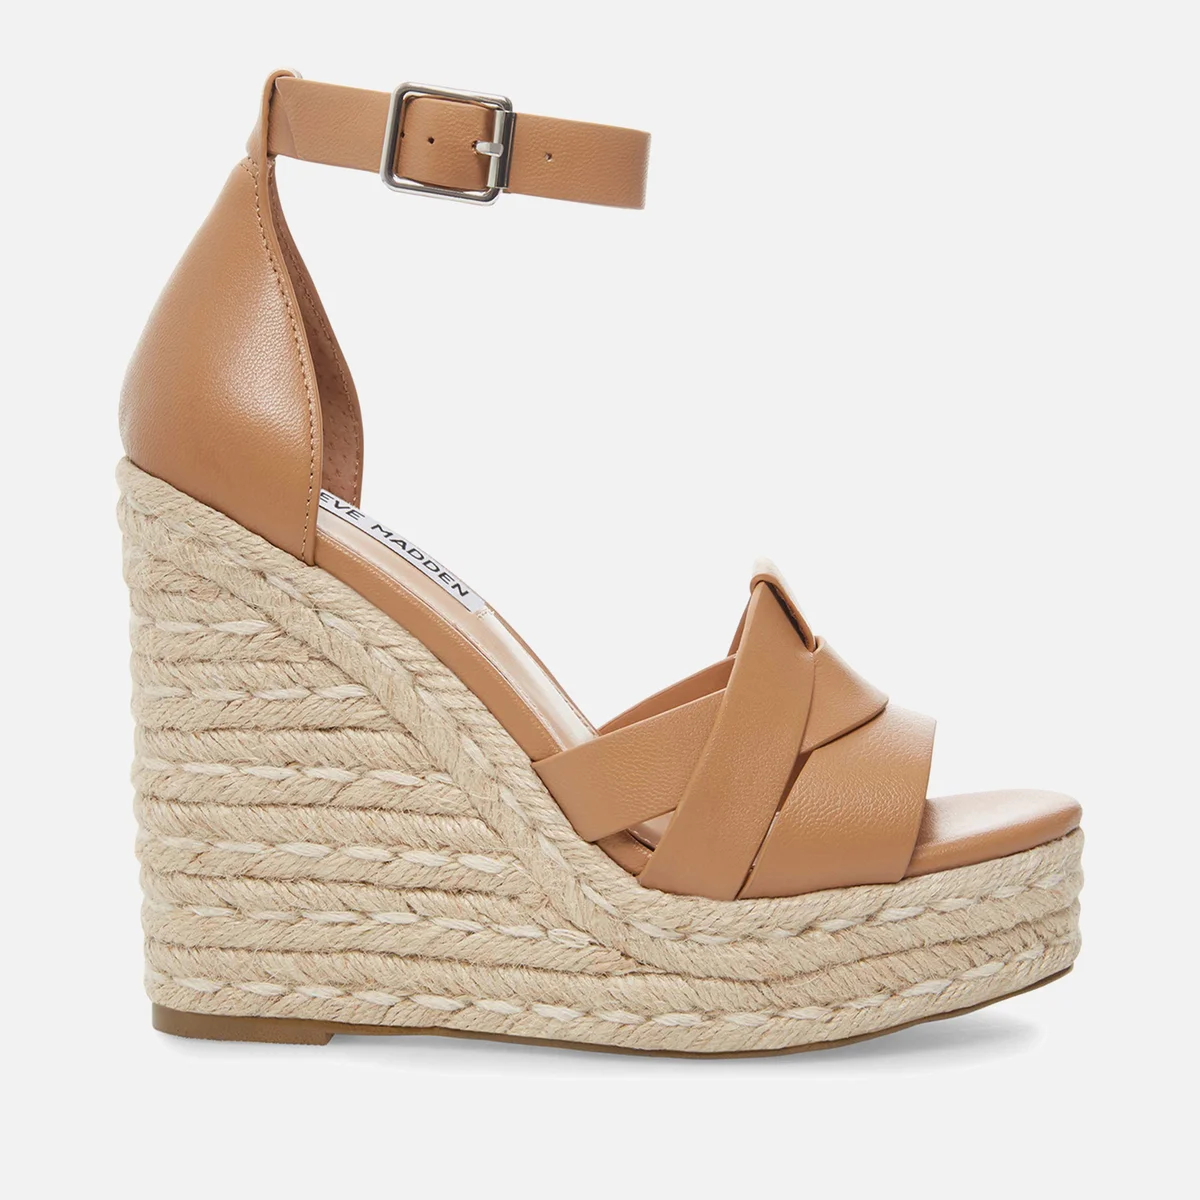 Steve Madden Sivian Leather Wedged Sandals Image 1